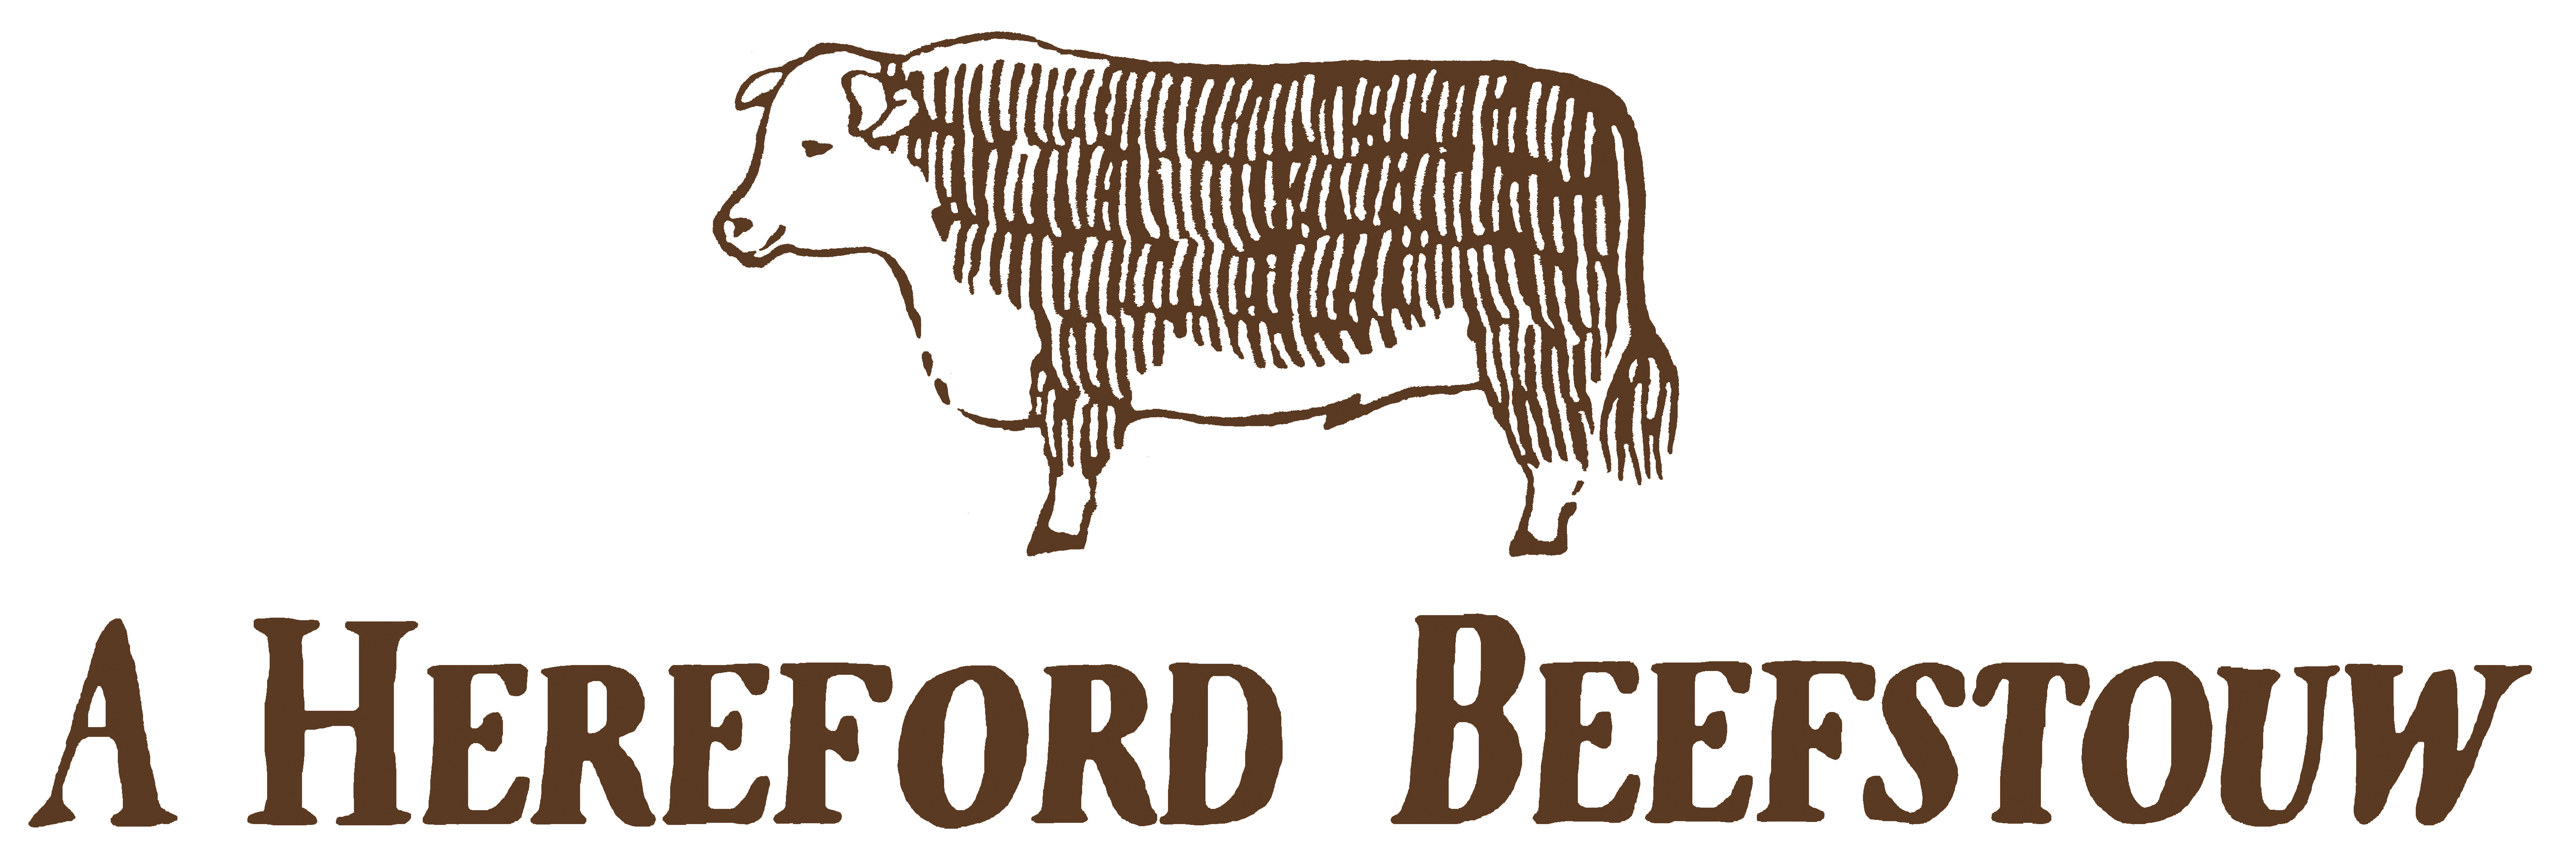 A Hereford Beefstouw